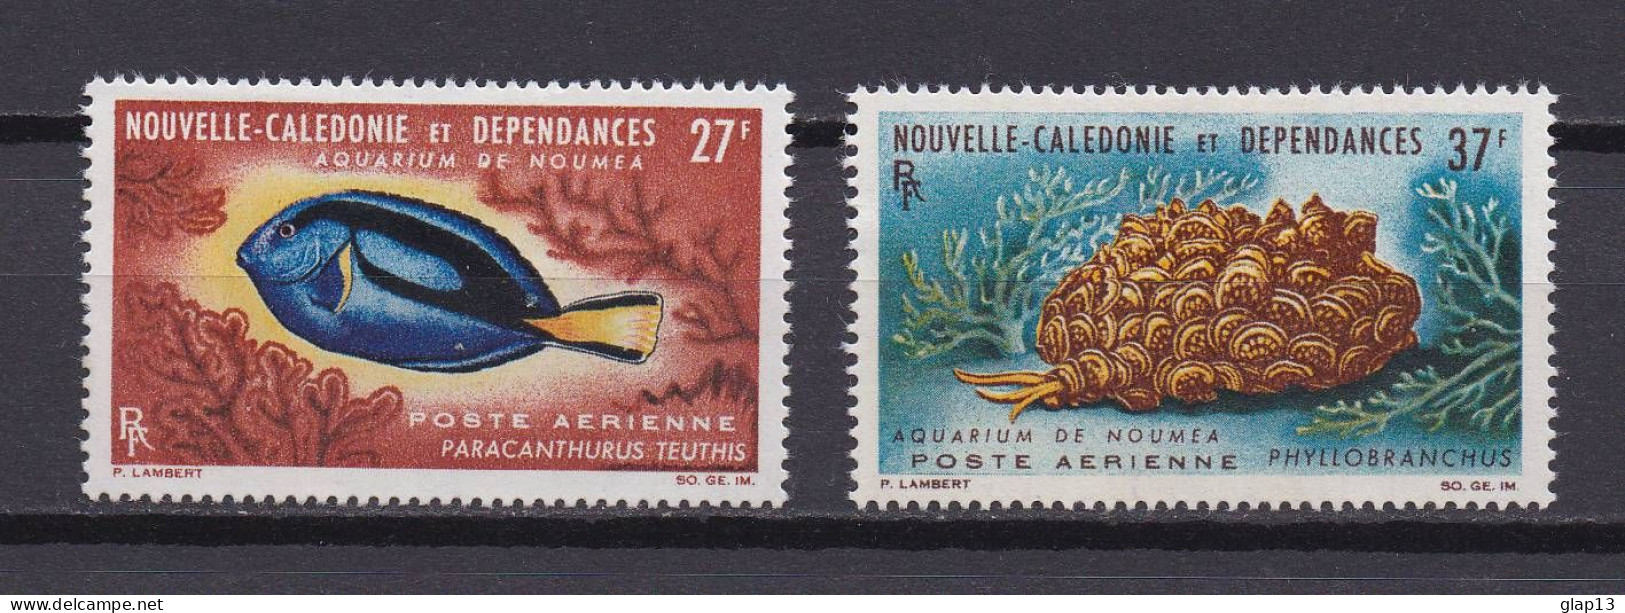 NOUVELLE-CALEDONIE 1965 PA N°77/78 NEUF AVEC CHARNIERE FAUNE MARINE - Unused Stamps